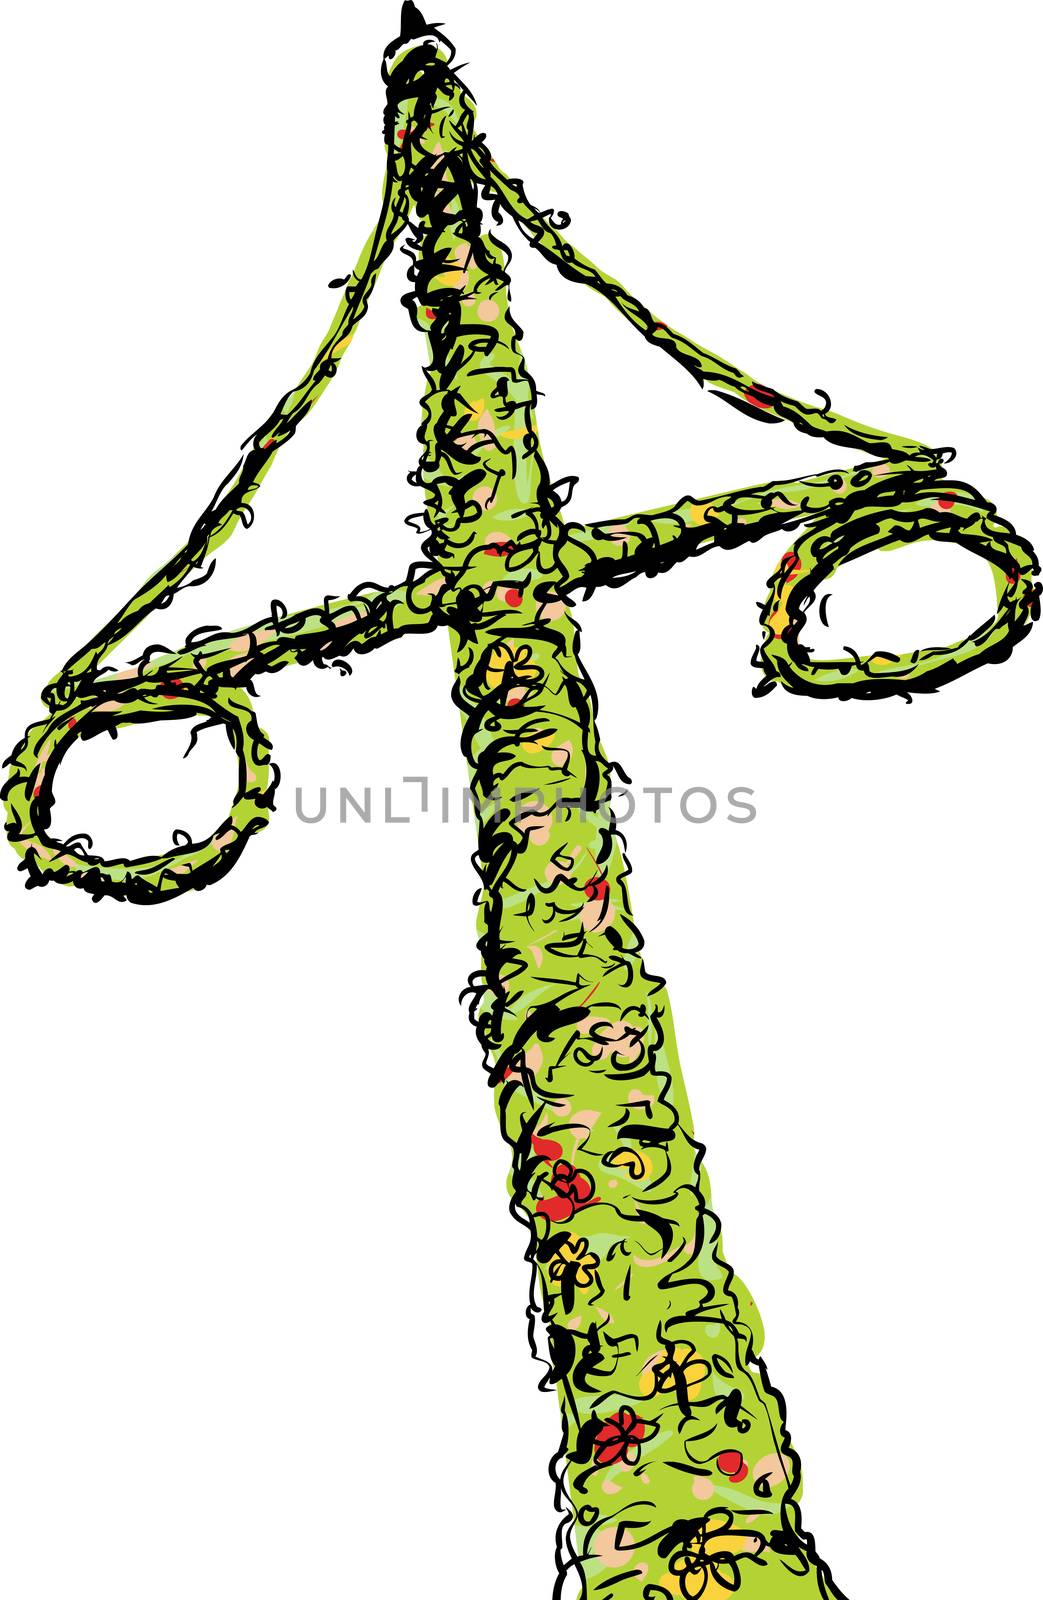 Sketch of colorful Swedish midsummer holiday Maypole with two wreaths